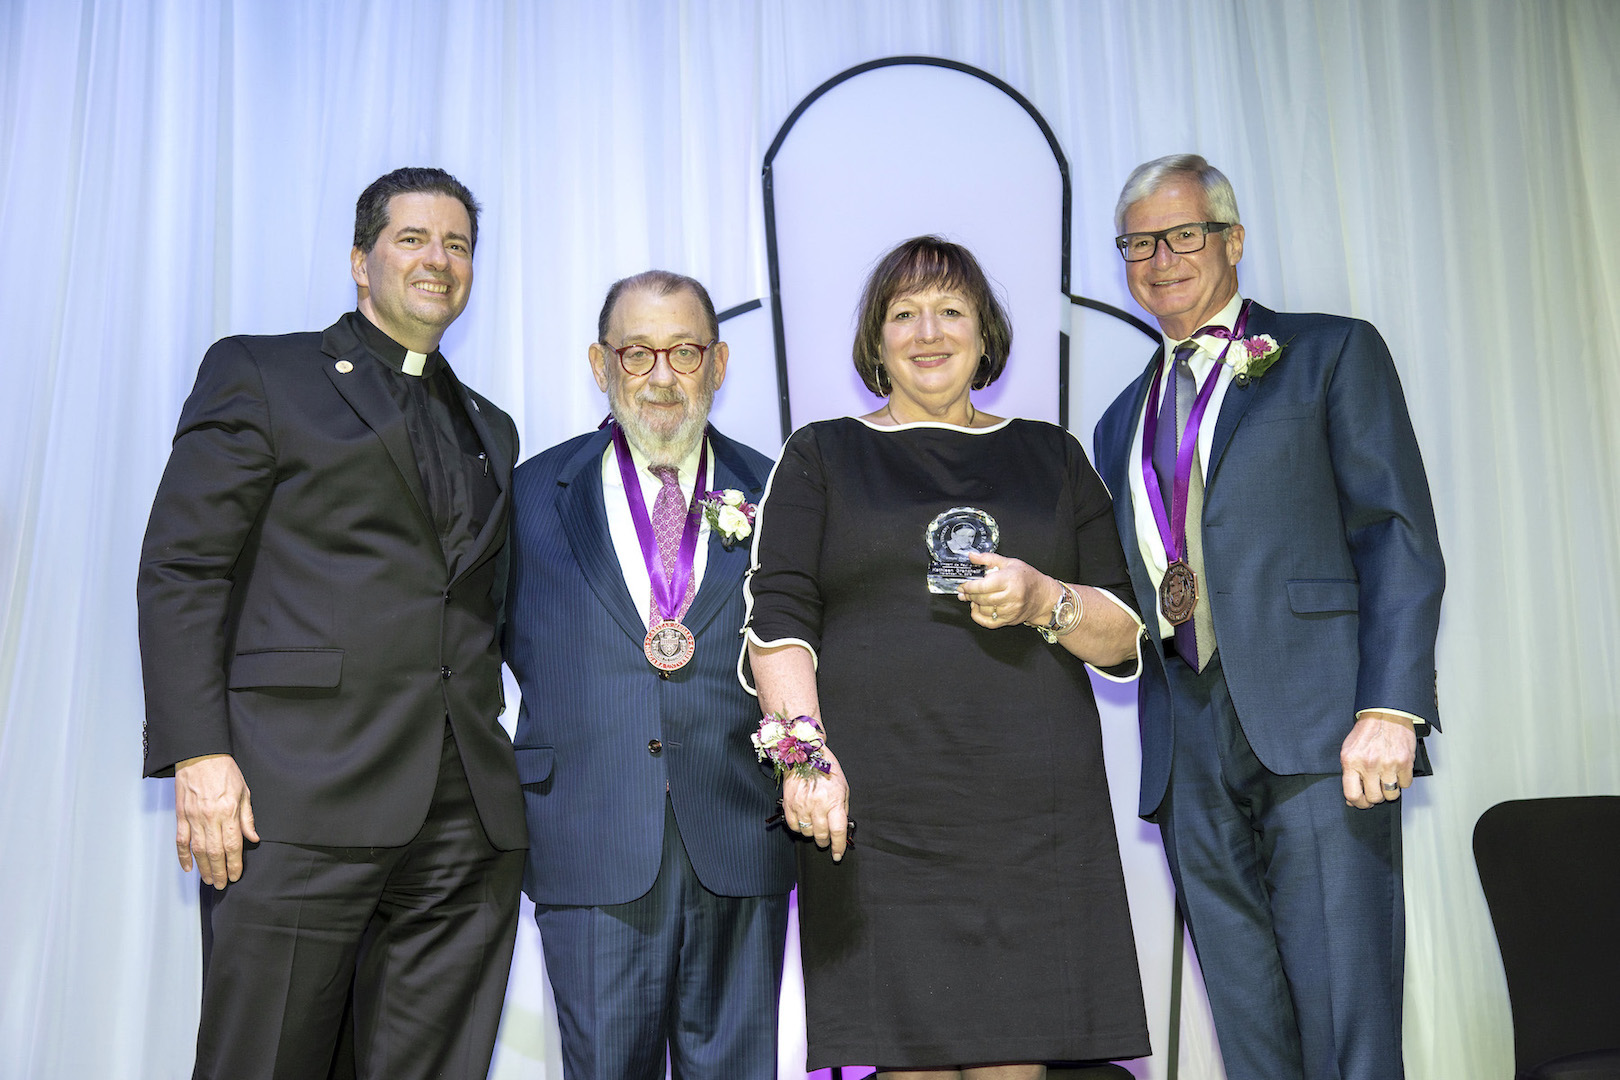 The Rev. James J. Maher, C.M., Niagara University president, with President's Dinner honorees Jonathan A. Dandes (Caritas Medal), president, Rich Baseball Operations; Kathleen A. Granchelli (St. Vincent de Paul Award), CEO, YWCA of the Niagara Frontier; and Robert B. Engel, (Medal of Honor), CEO and managing director, BLT Advisory Services LLC/retired president and CEO, CoBank, ACB.